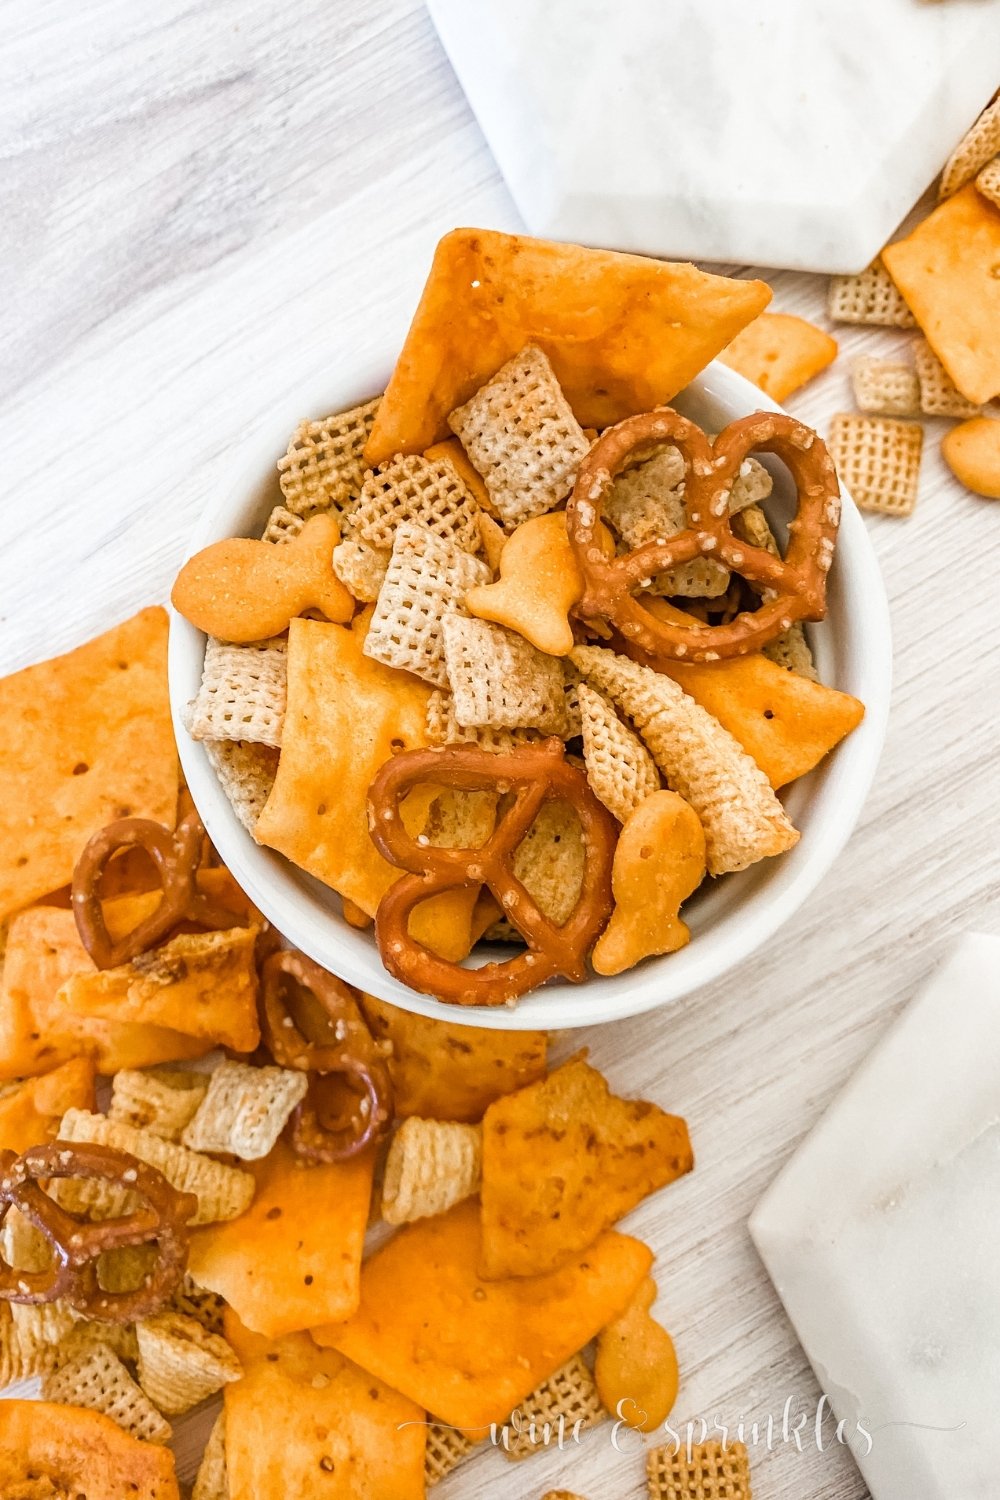 Cheesy Chip and Chex Savory Snack Mix